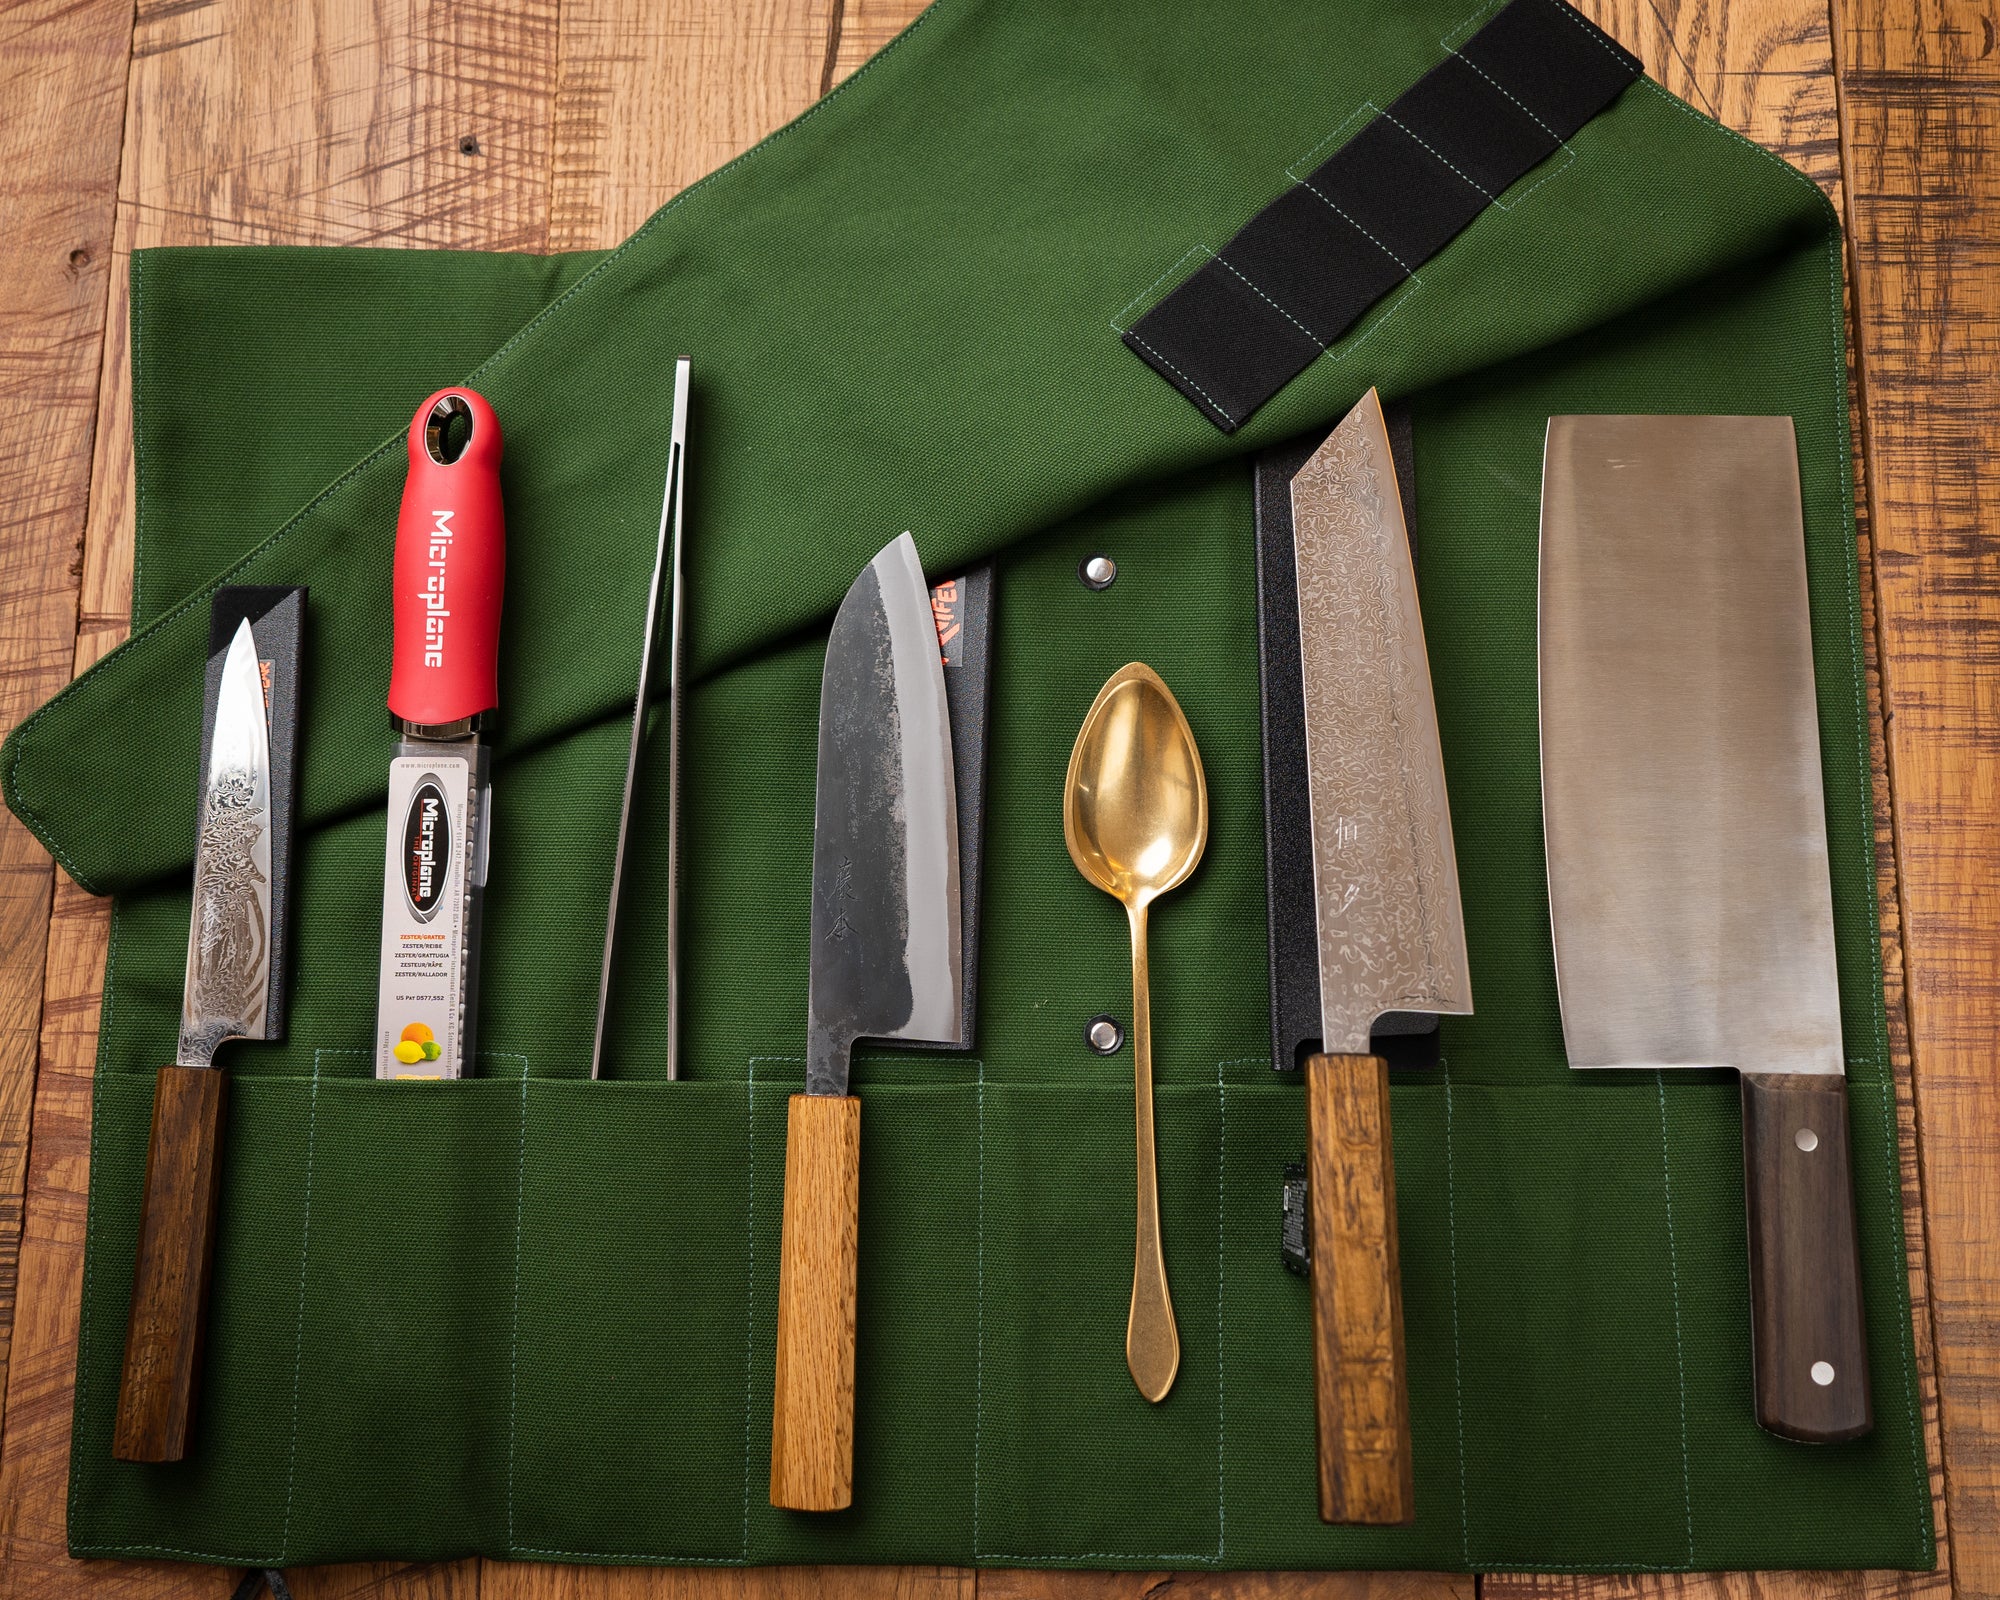 The Best Japanese Kitchen Knives for Professional Cooks and Chefs